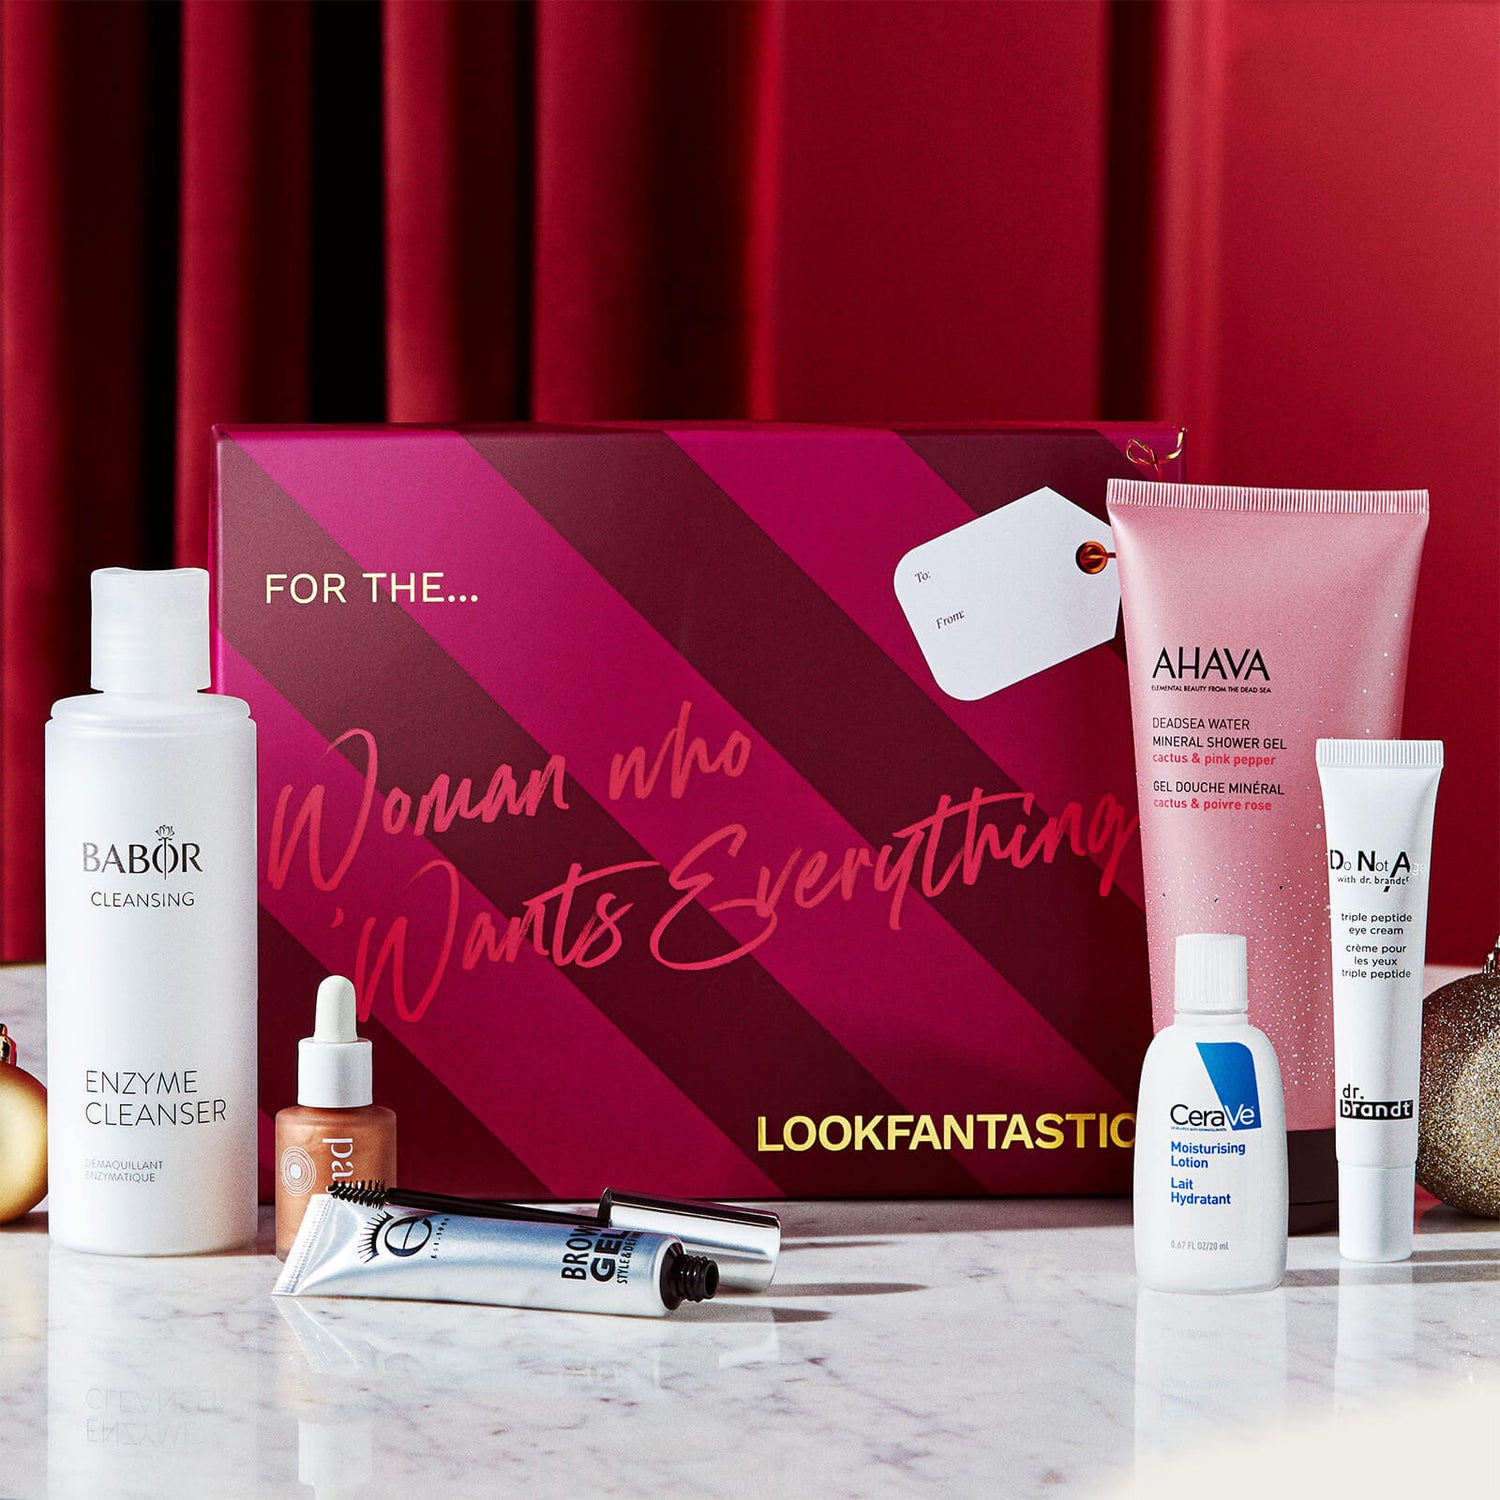 LOOKFANTASTIC Gift Guides 2021- The Woman Who Wants Everything (Worth over $135)